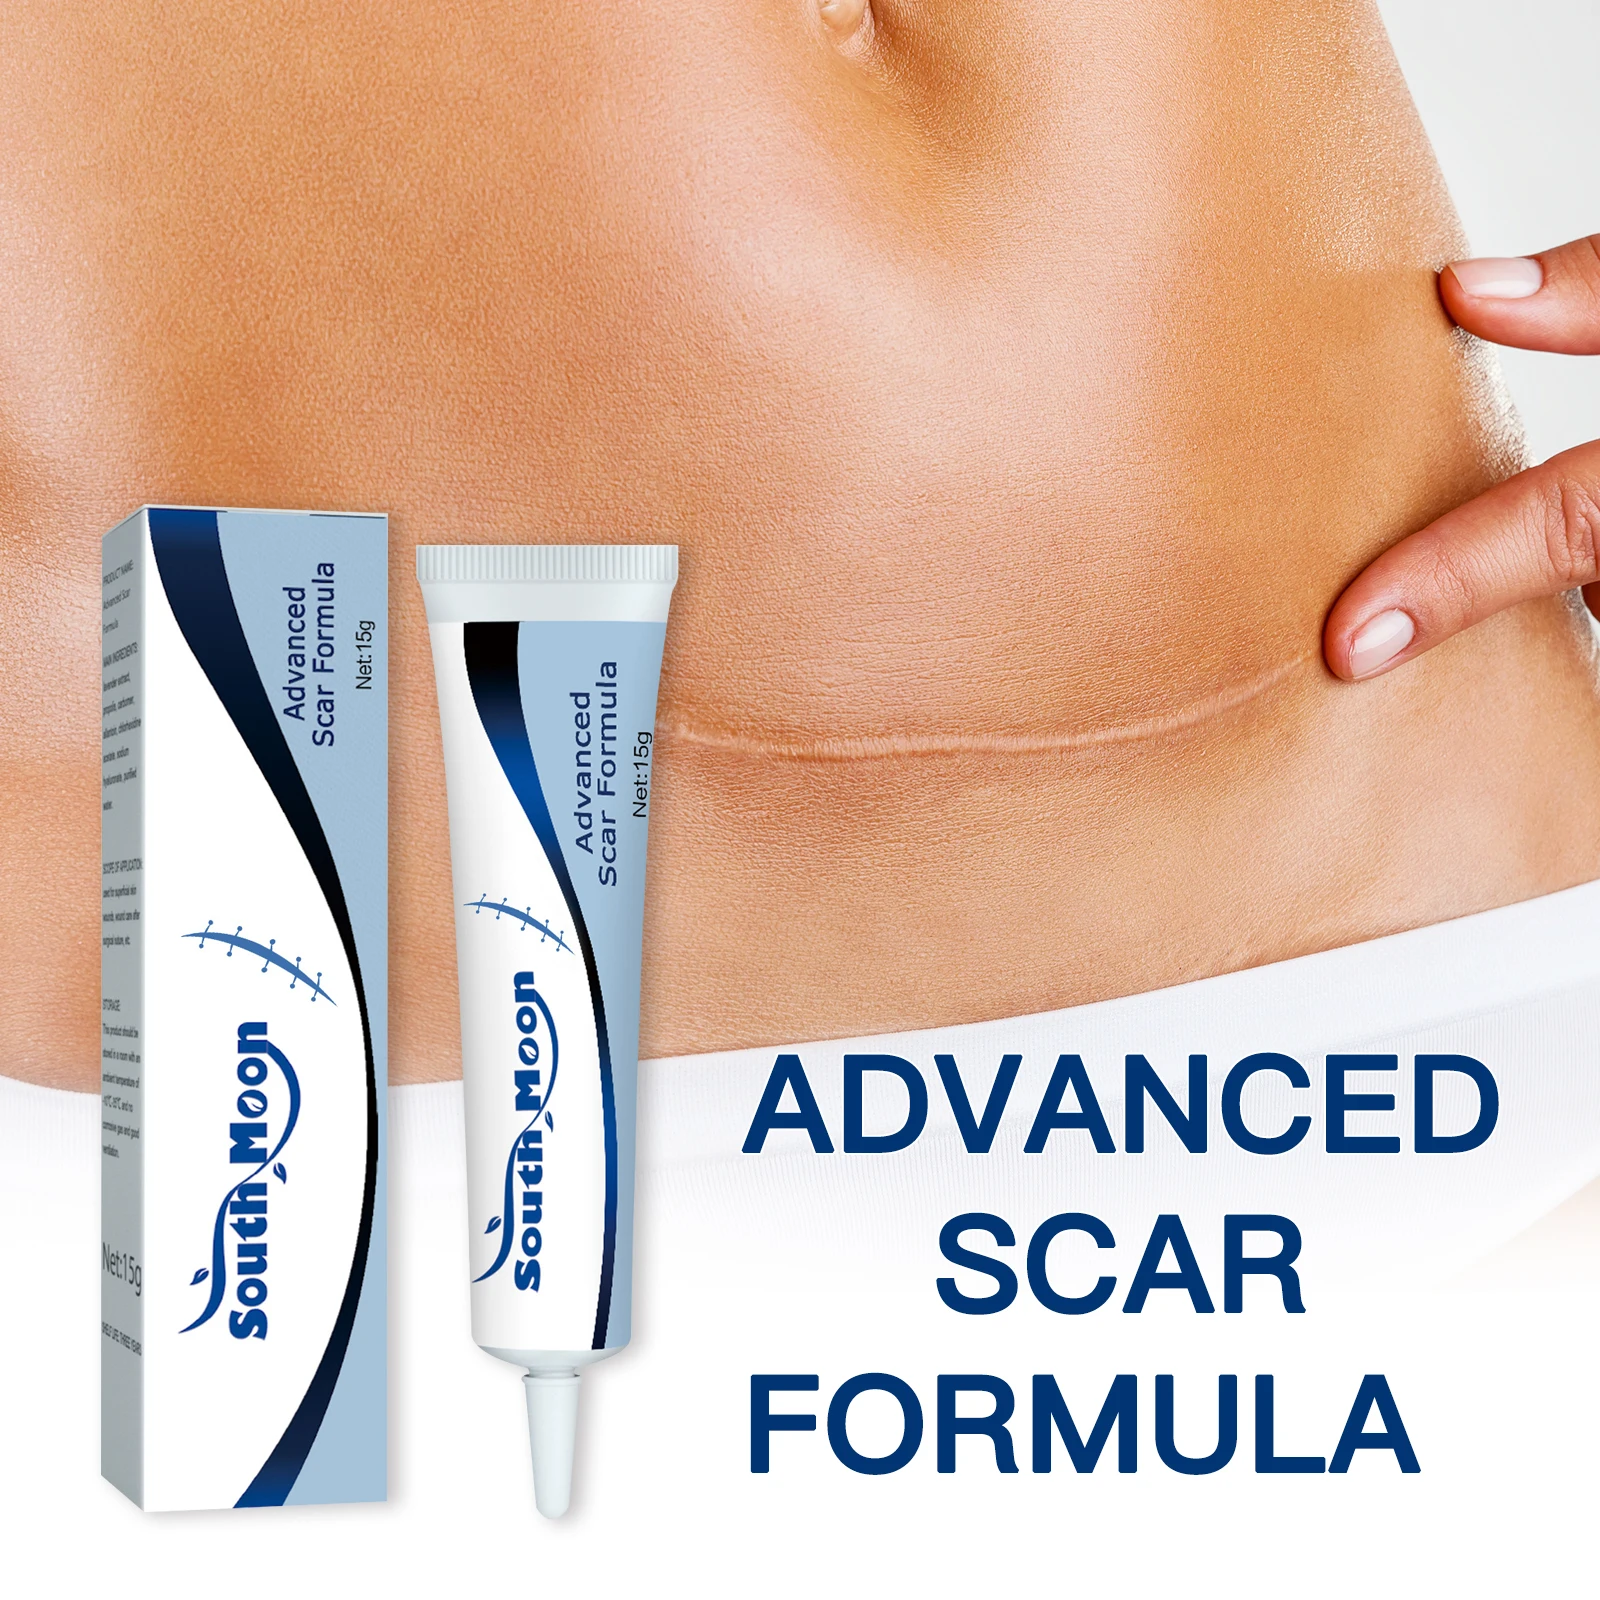 

Scar Removal Cream For Old Acne To Remove Permanently Keloid Wound Ointment Face Burn Surgery And Dark Spots